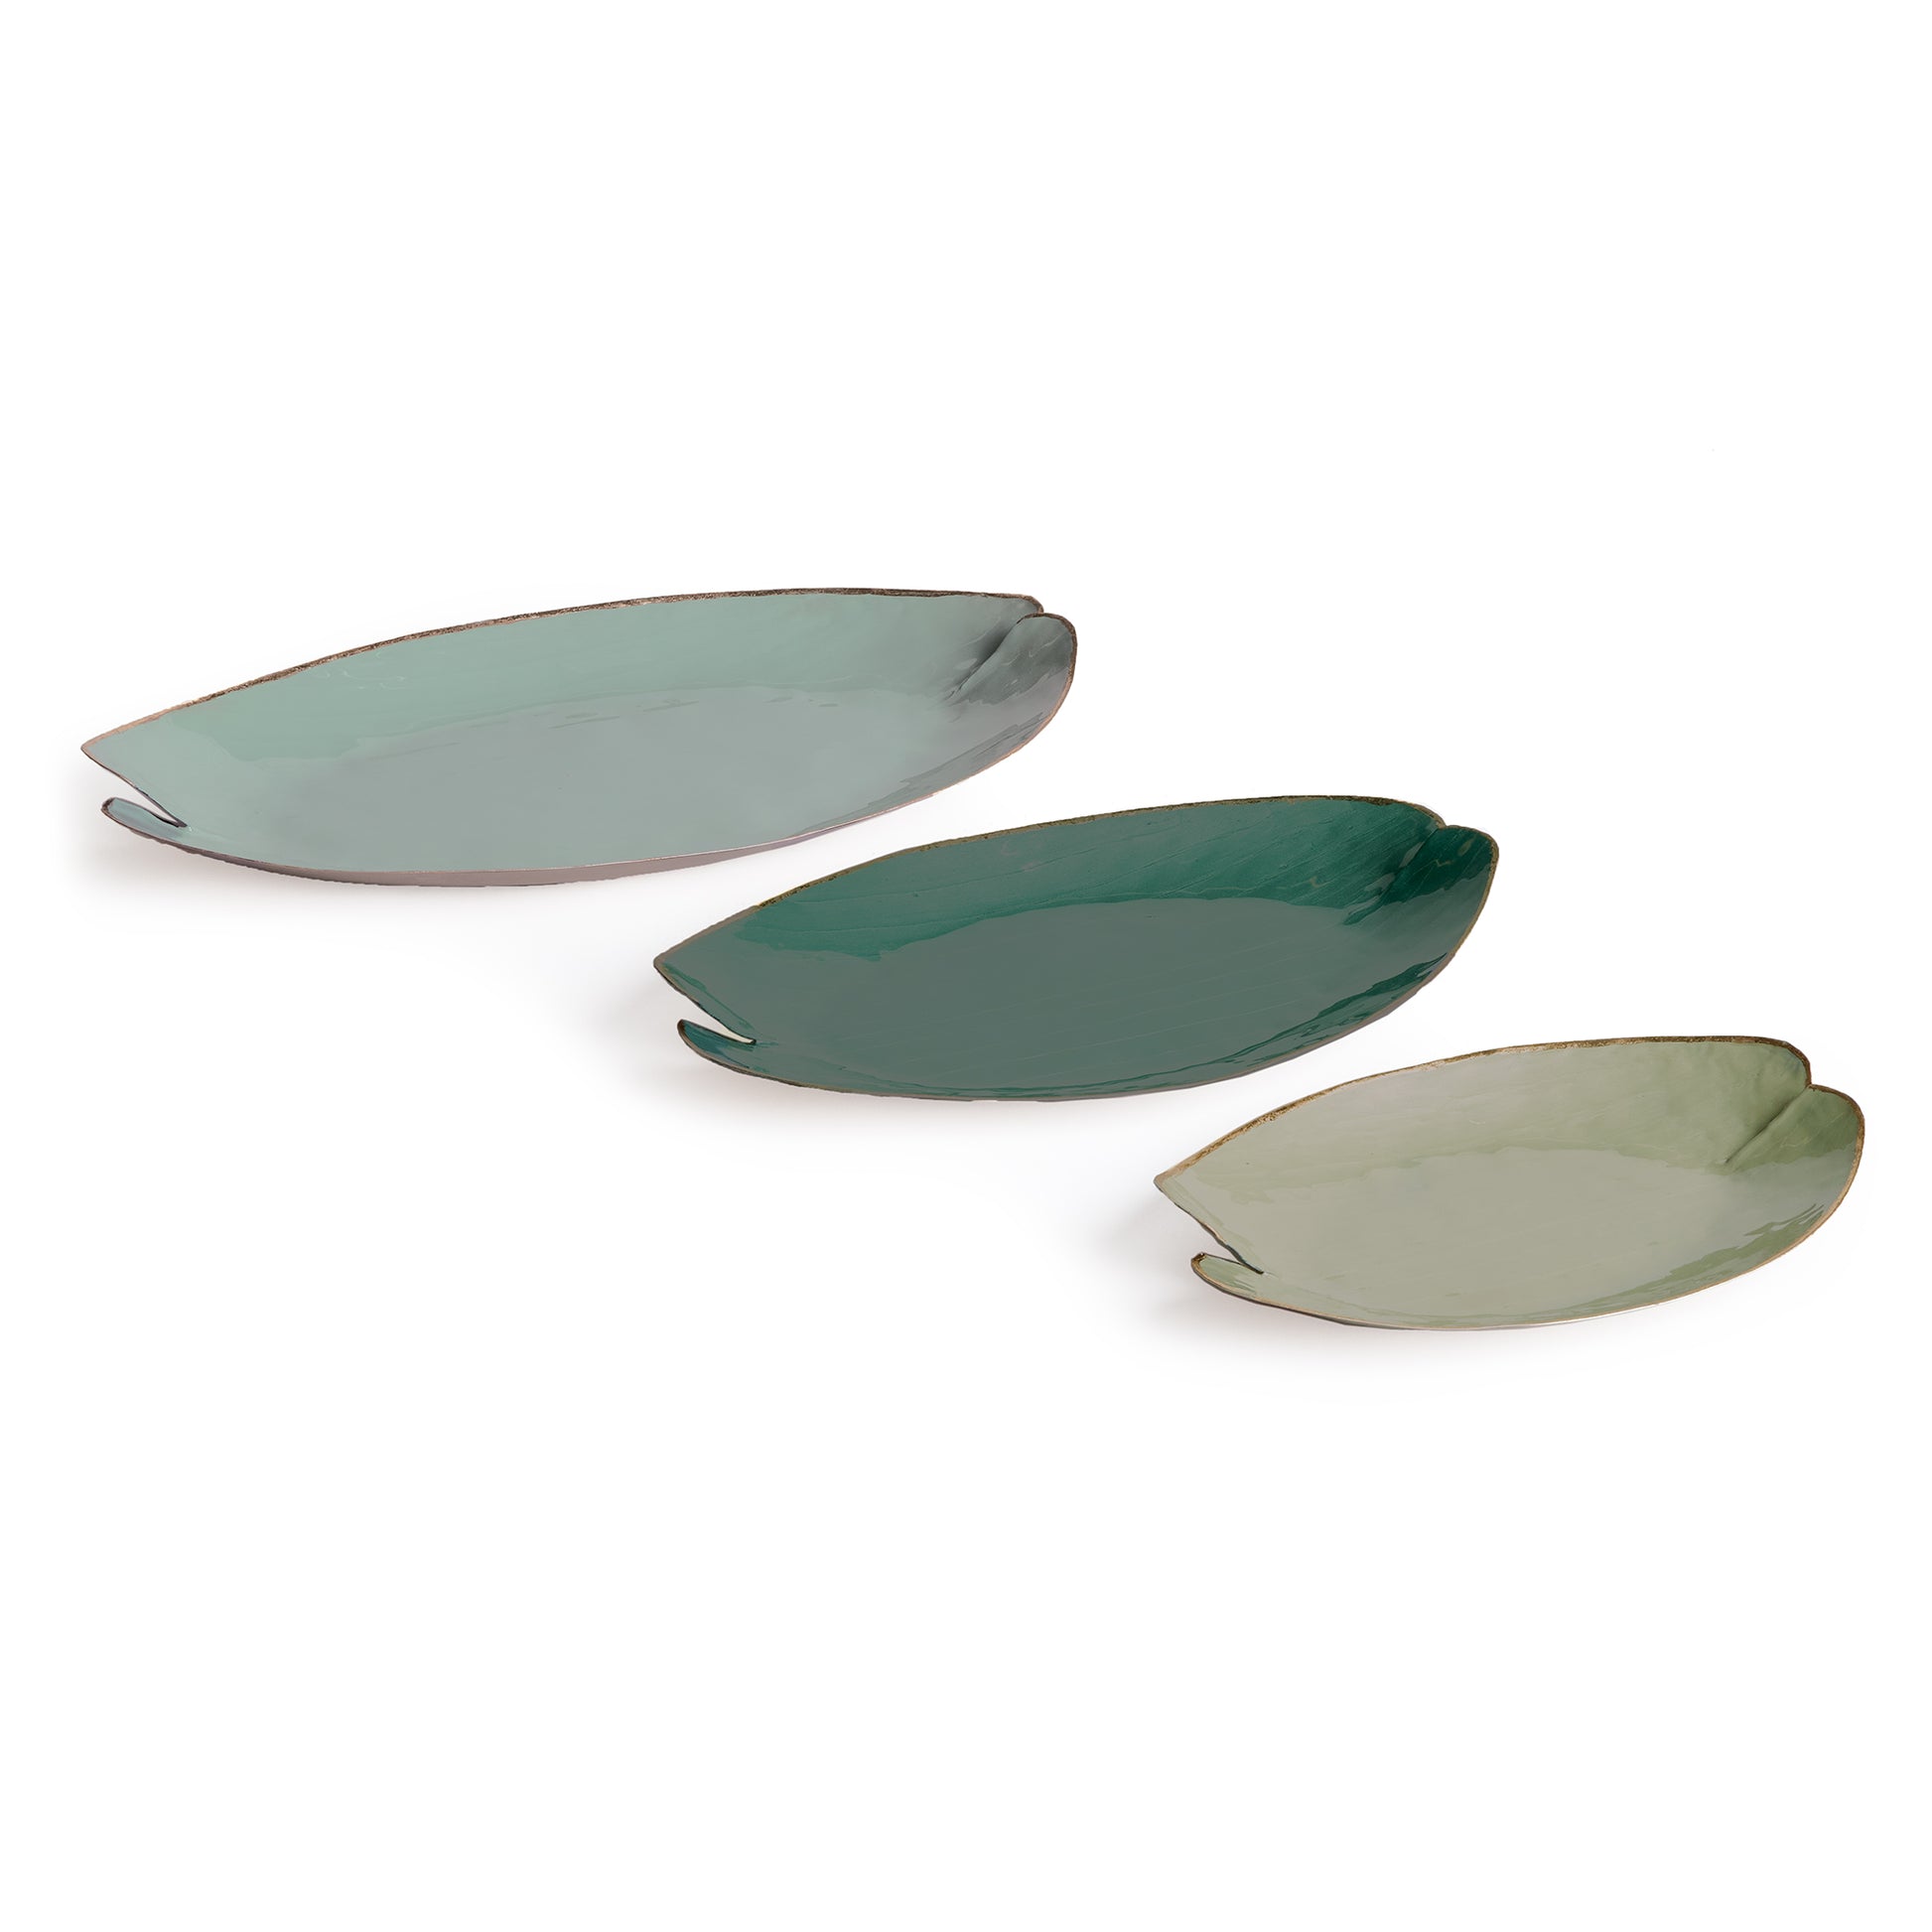 This charming set of hand-painted decorative trays are inspired by lily pads. With a gold edge detail, and coordinating verdant hues, they add a pop of colorful character to kitchen island, side table or ottoman.